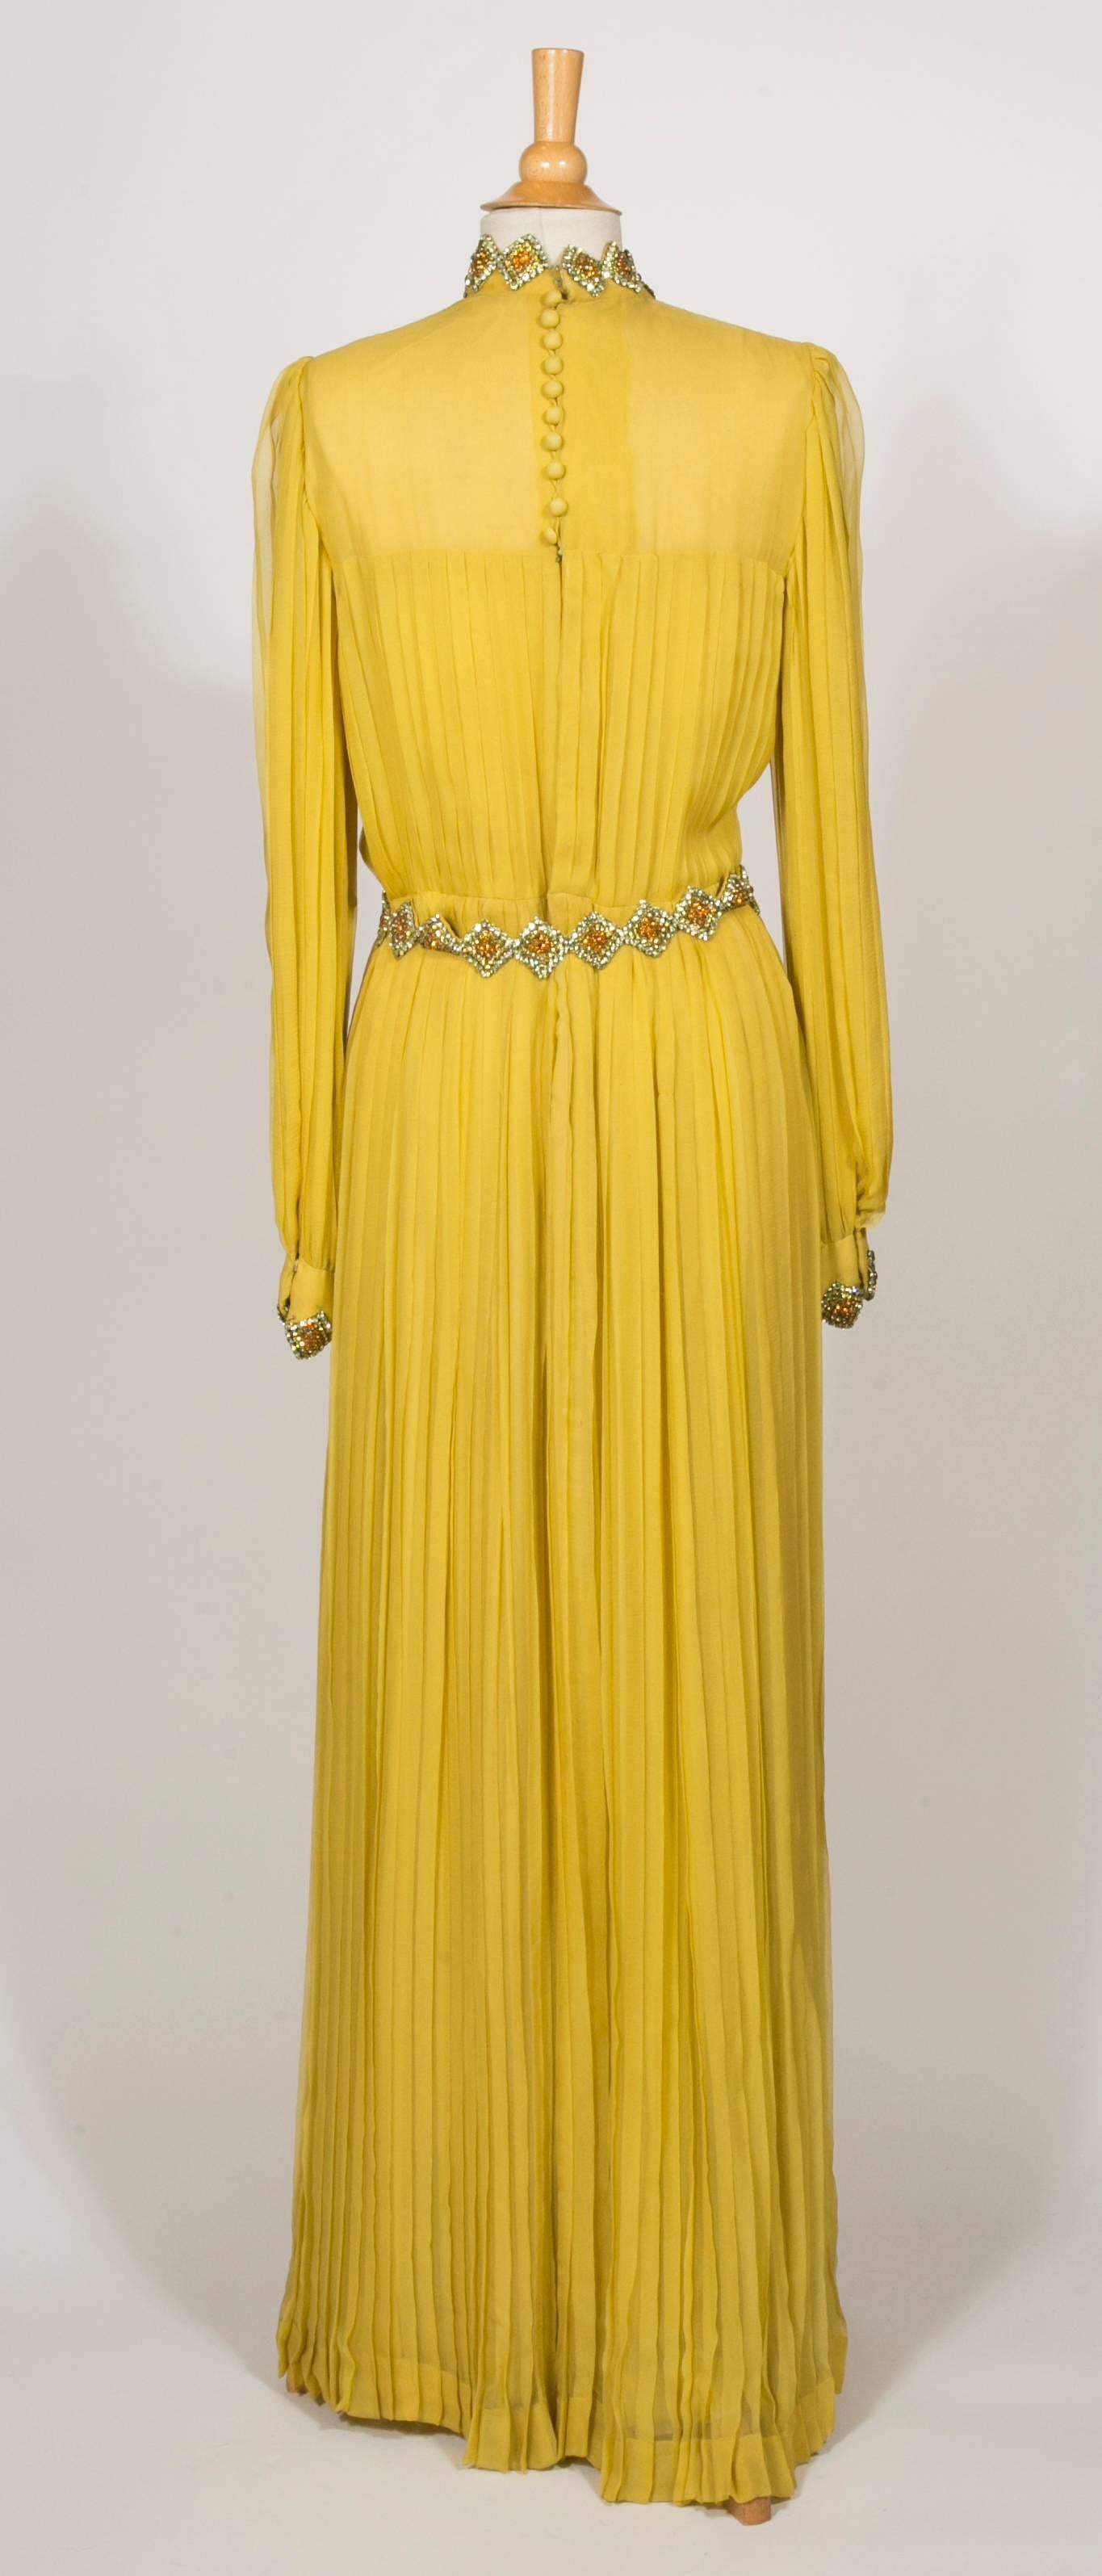 The neckline and the wrists are embroidered With Yellow ,Gold,and Cognac color strass in the shape diamond.
The belt takes back the same motive and is 75cm lenght .
The fabric is a Silk Chiffon and the dress and the sleeves are completely pleated